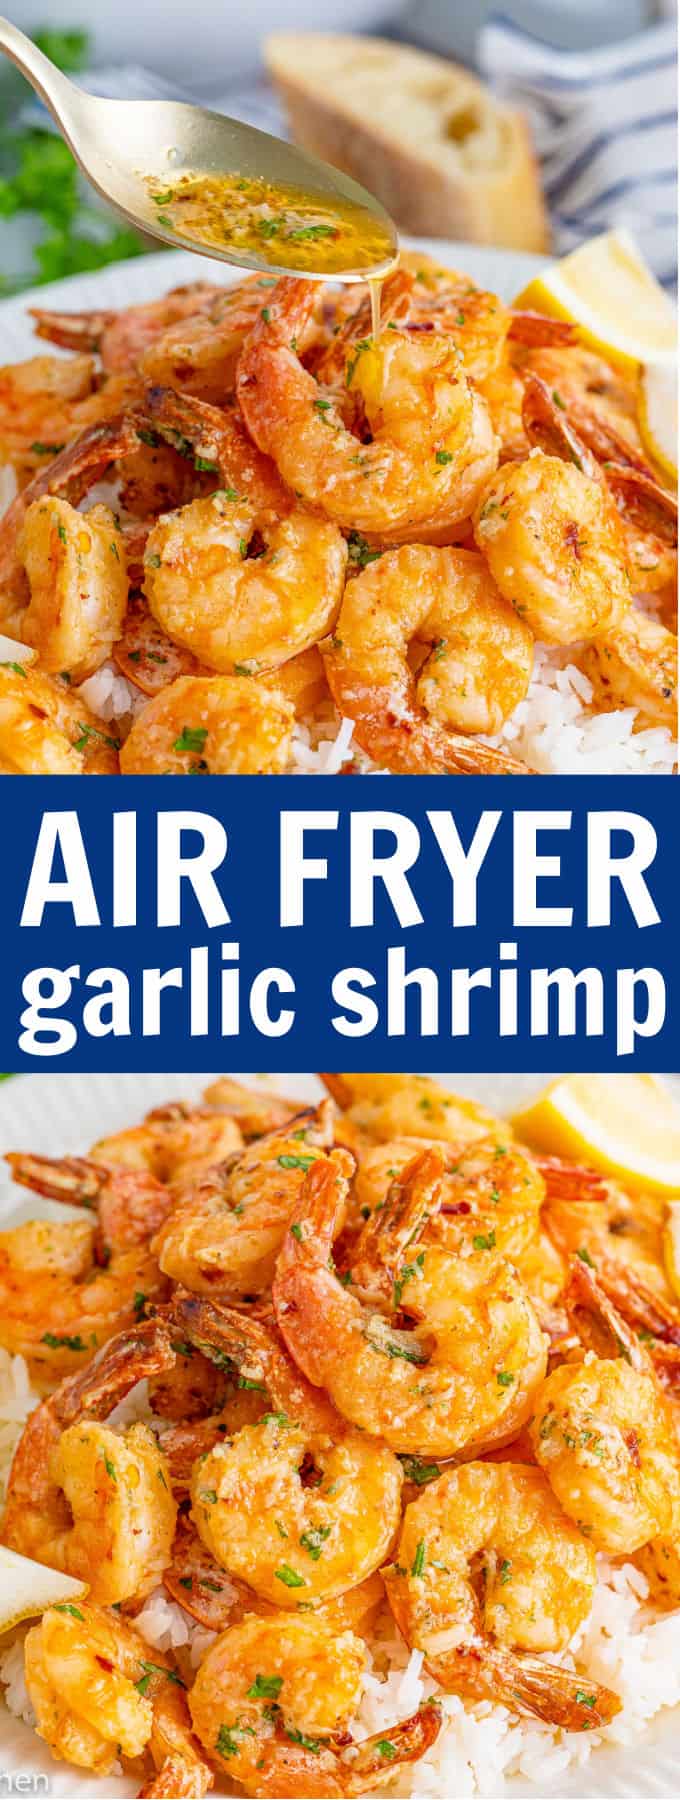 a spoon drizzling garlic butter over a plate of shrimp.